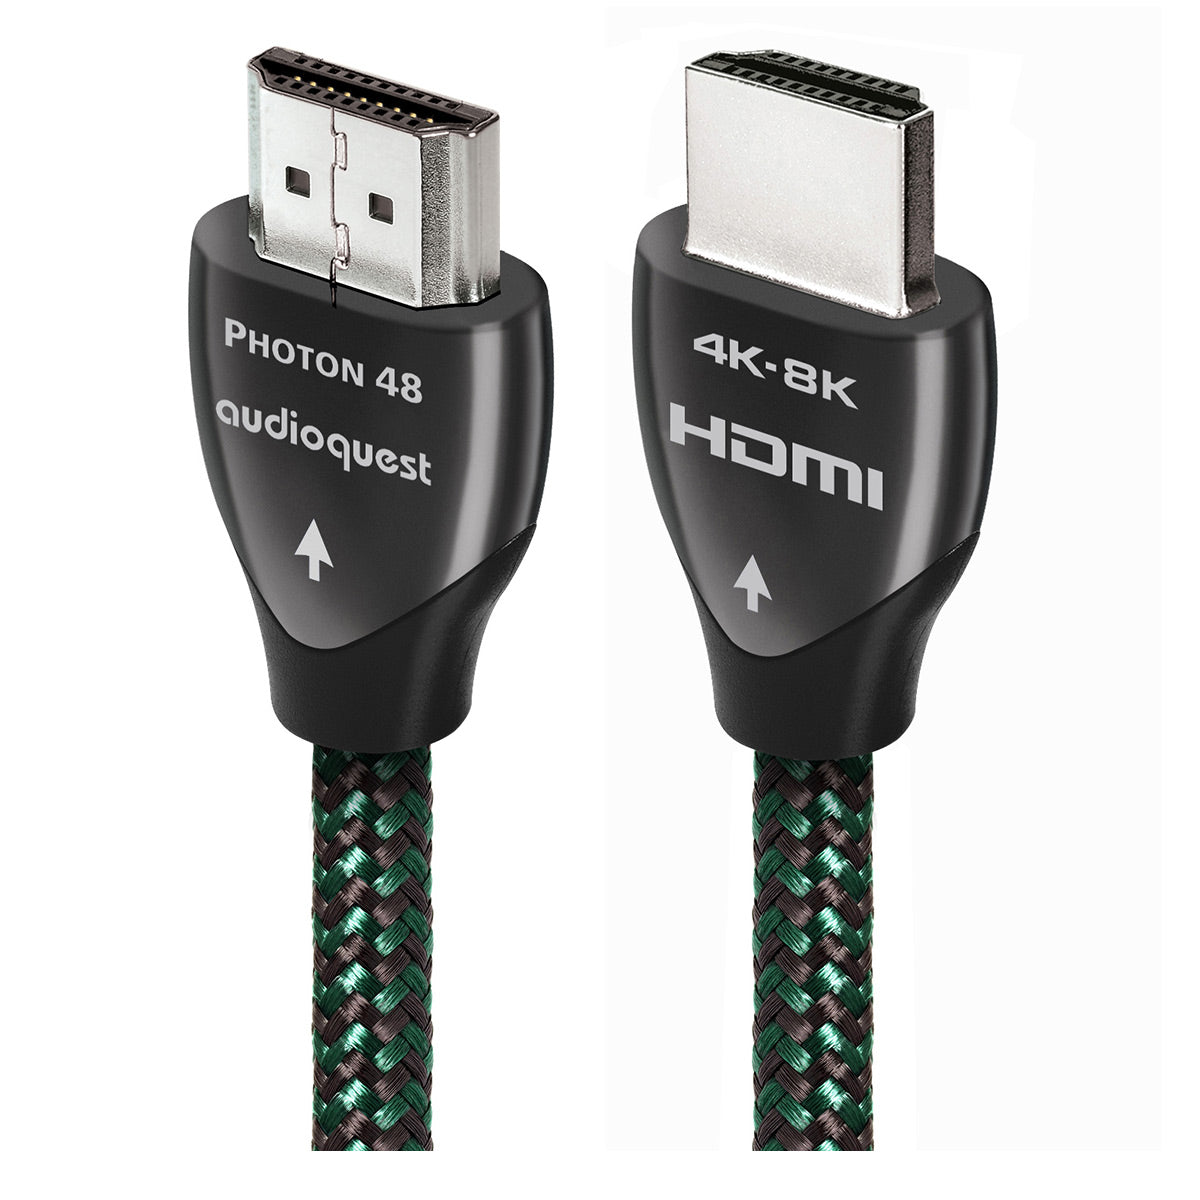 Photos - Cable (video, audio, USB) AudioQuest Photon 48 4K-8K 48Gbps Ultra High Speed HDMI Cable for Xbox - 9 